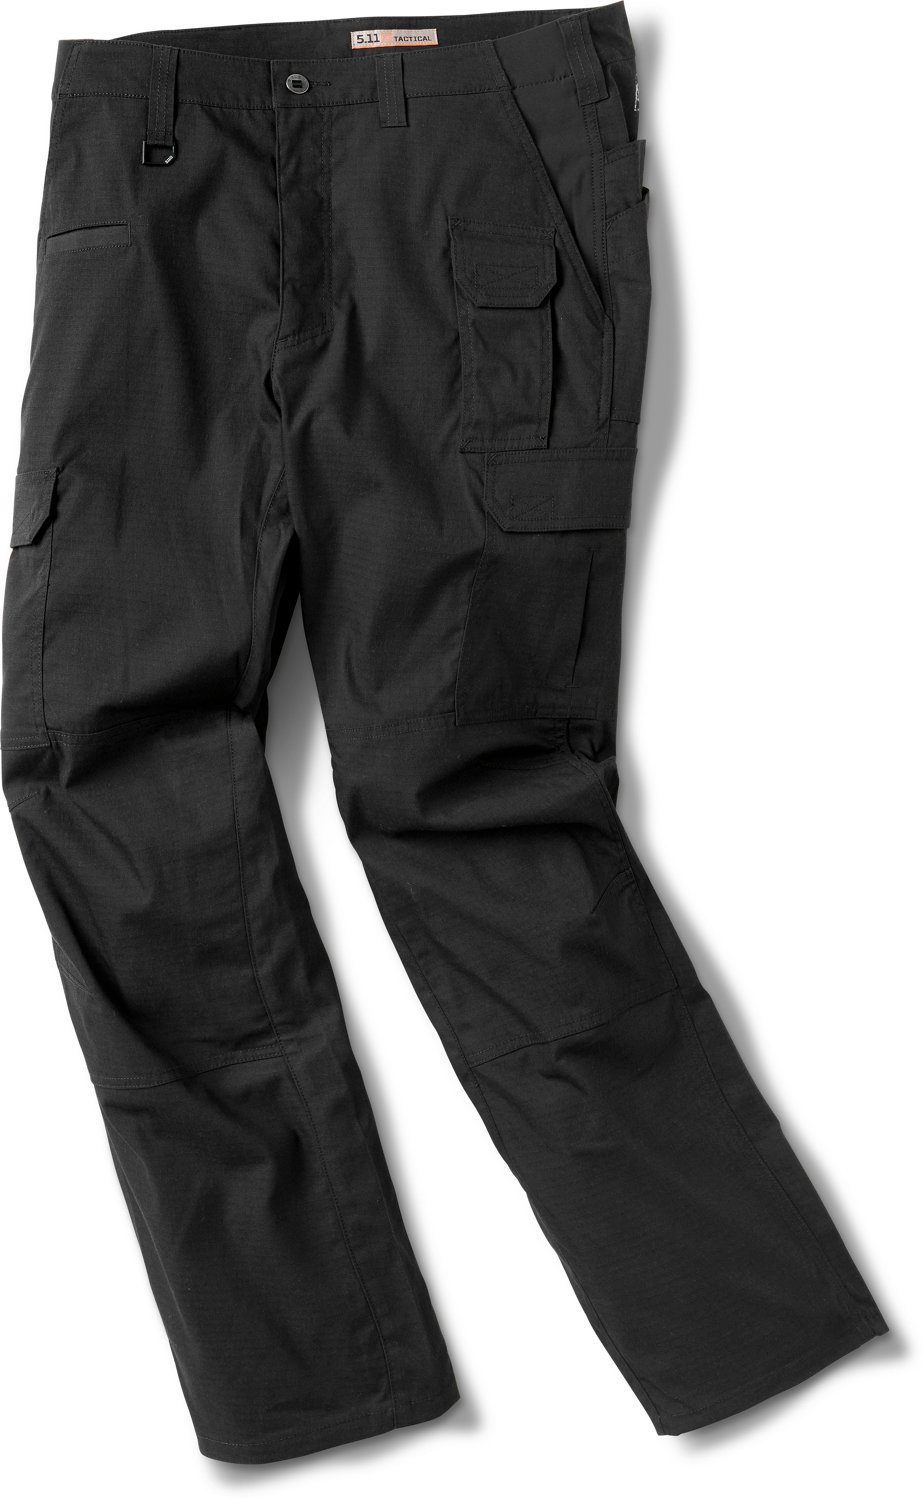 5.11 Tactical Men's ABR Pro Pants | Free Shipping at Academy